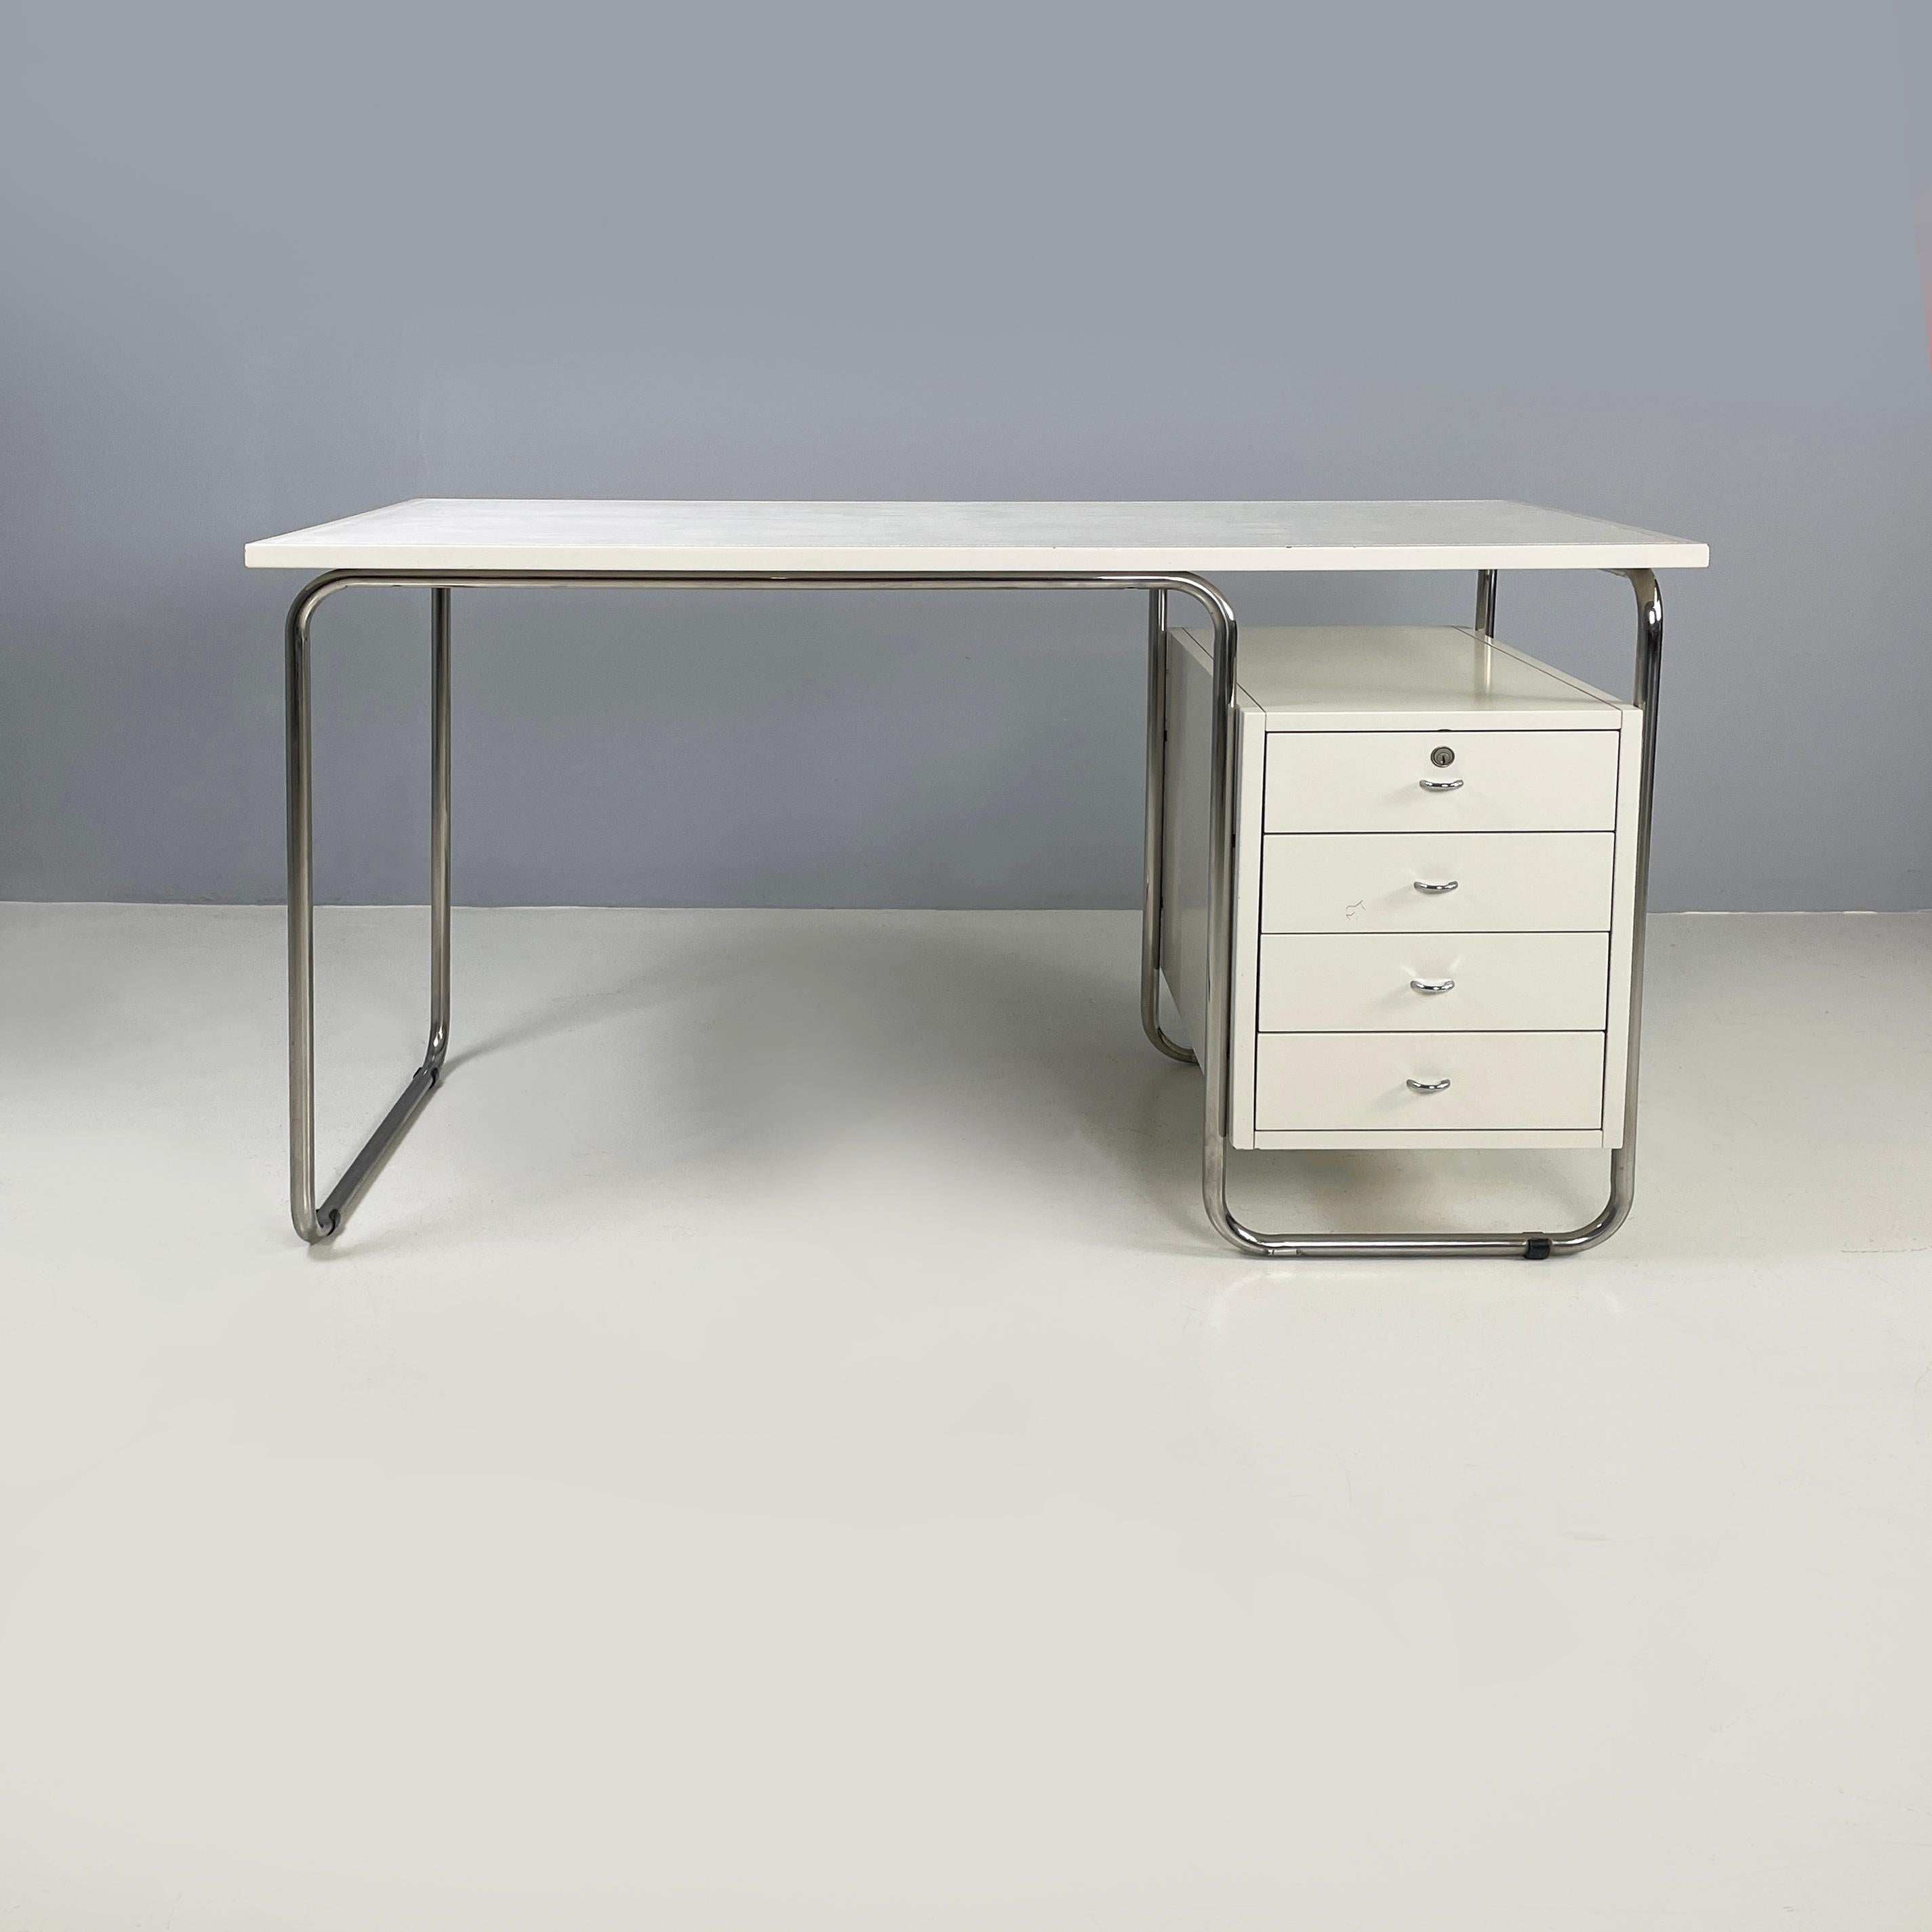 Italian Bauhaus White Desk Comacina by Piero Bottoni for Zanotta, 1980s
Desk mod. Comacina with rectangular wooden top and rectangular insert in white leather. On the side there is a white painted wooden chest of drawers, which has 4 drawers with